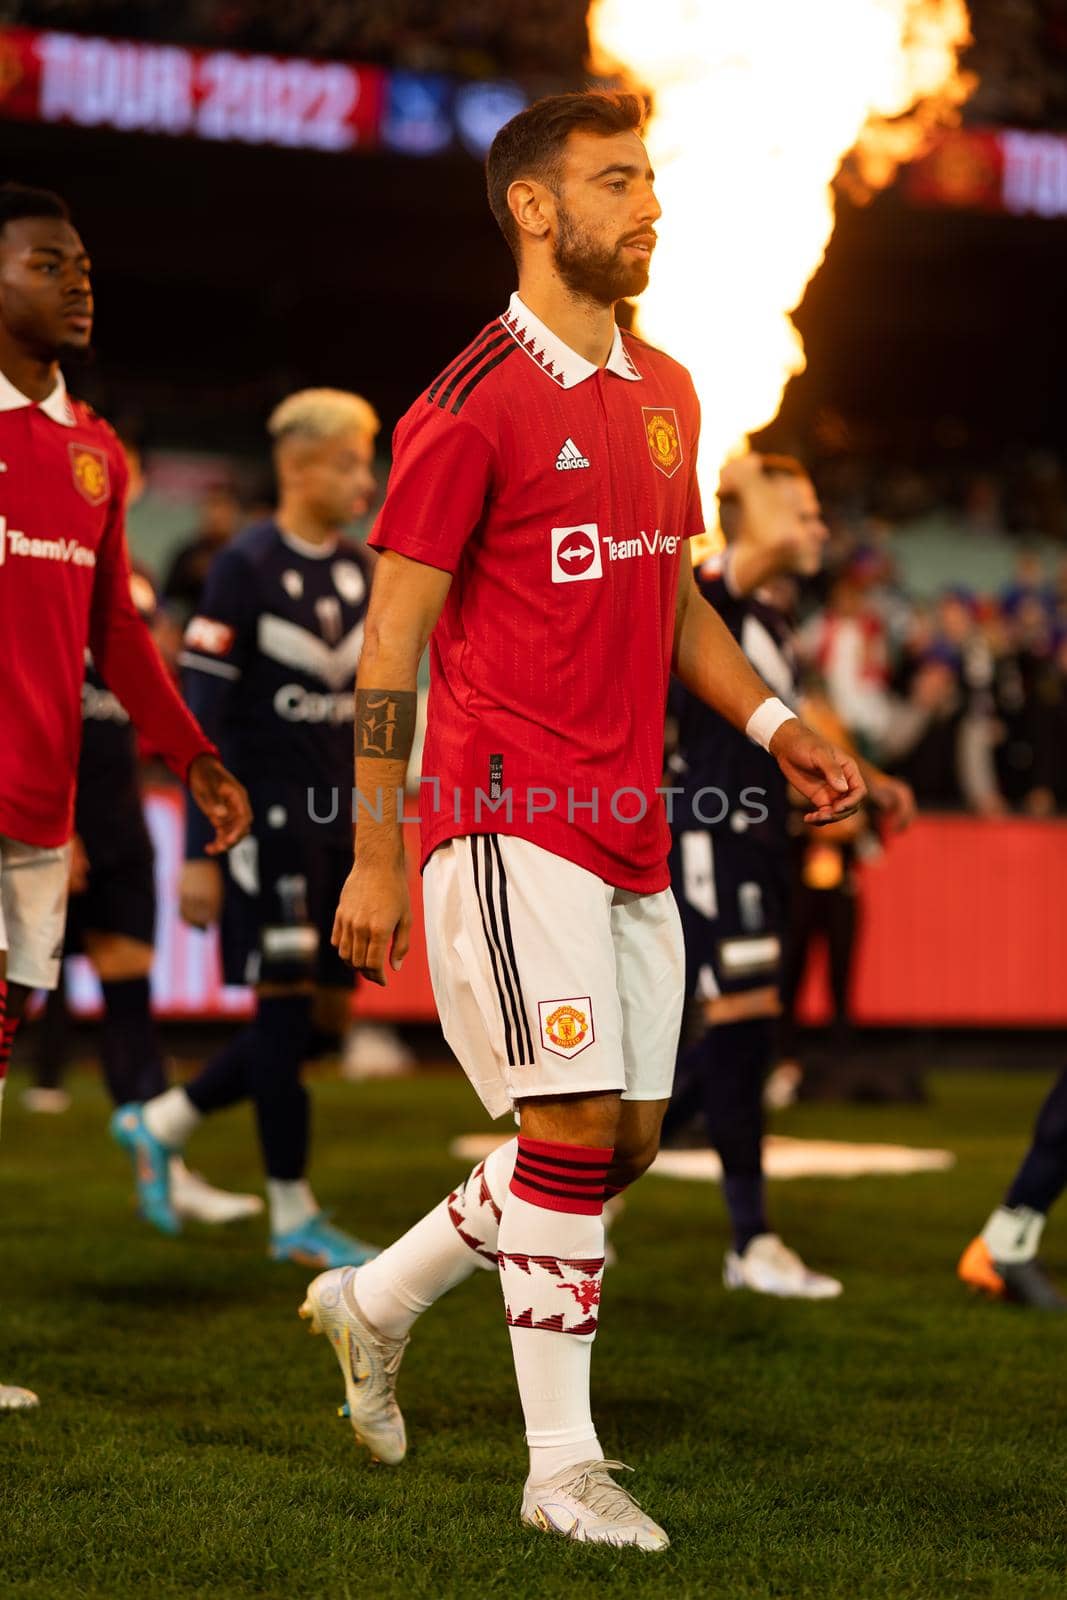 MELBOURNE, AUSTRALIA - JULY 15: Bruno Fernandes of Manchester United enters the field before Melbourne Victory plays Manchester United in a pre-season friendly football match at the MCG on 15th July 2022